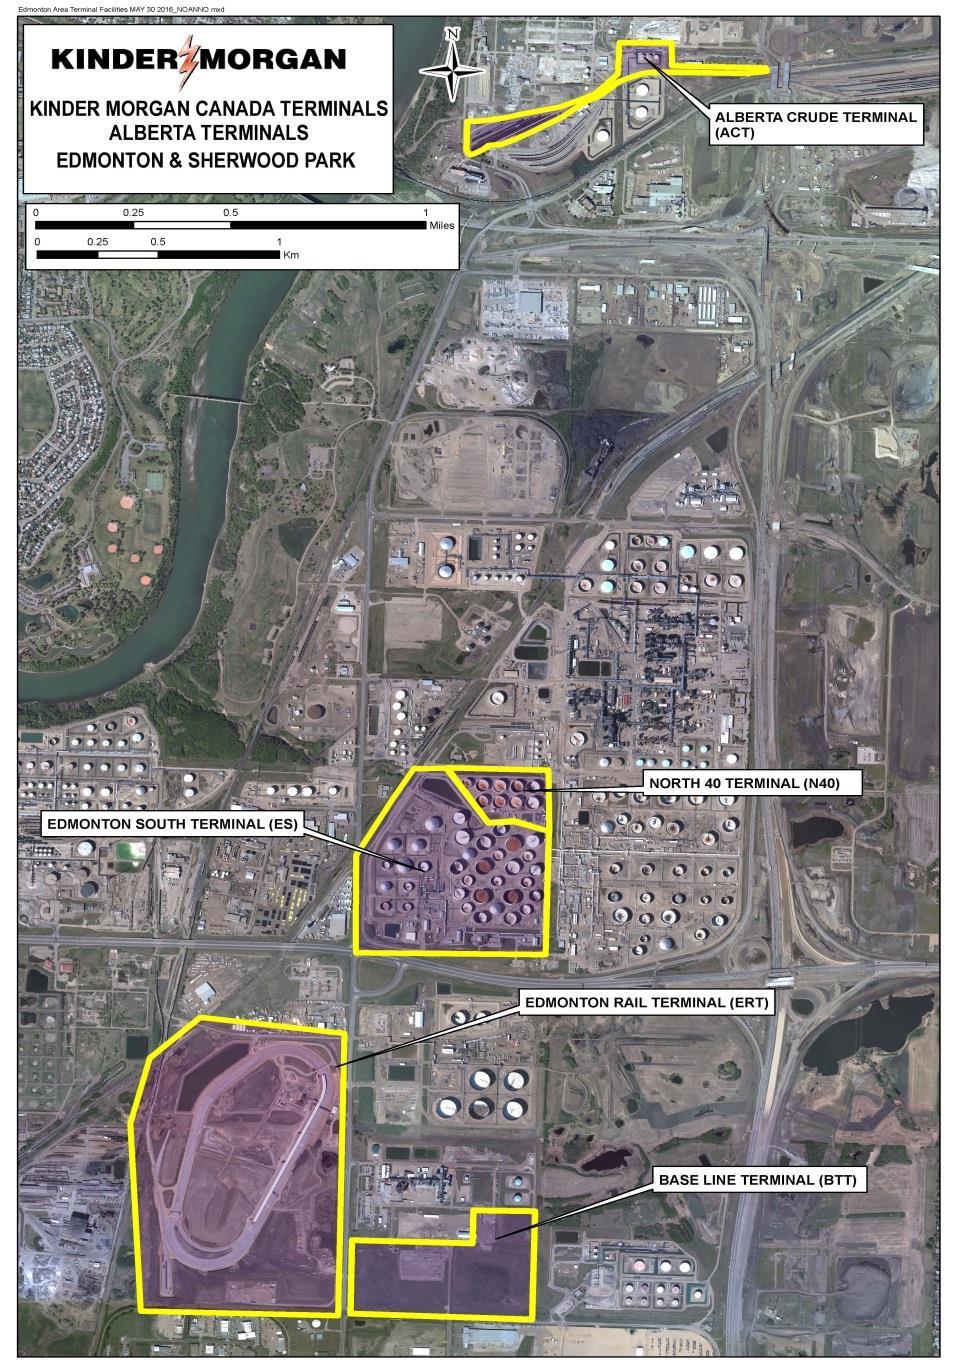 Kinder Morgan Facilities TransMountain Facility In-service 1953 Contains 20 tanks; capacity of ~3 million barrels of nonmerchant storage Edmonton South Terminal Expansion In-service 2013/2014